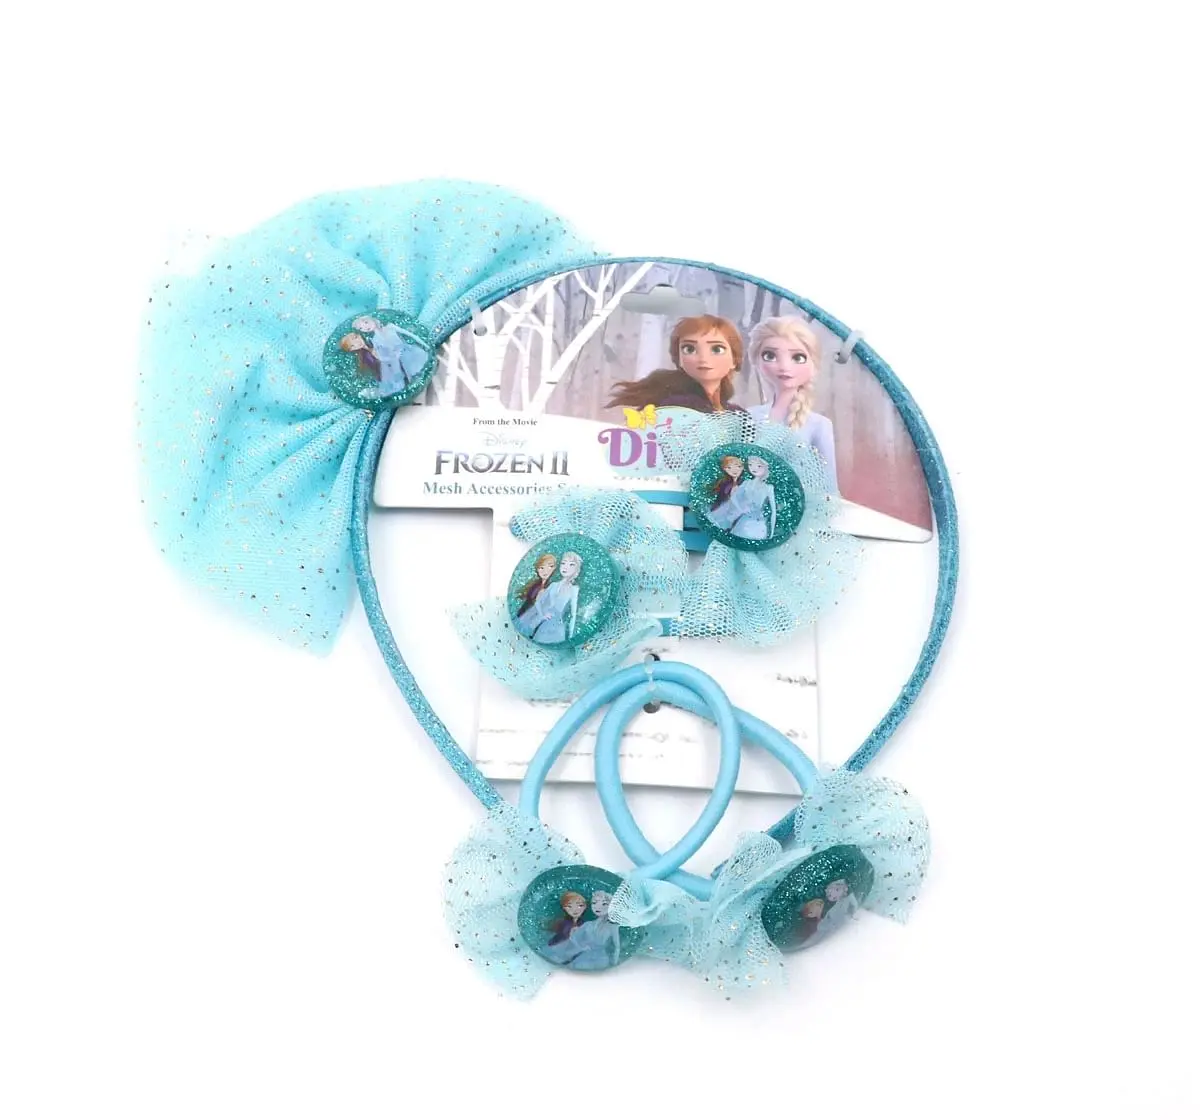 Disney Frozen II Accessory Set by Li'l Diva Pack of 6, 1 Headbands, 2 Clips And 2 Rubber Bands For Girls 3 Years And Above, Blue